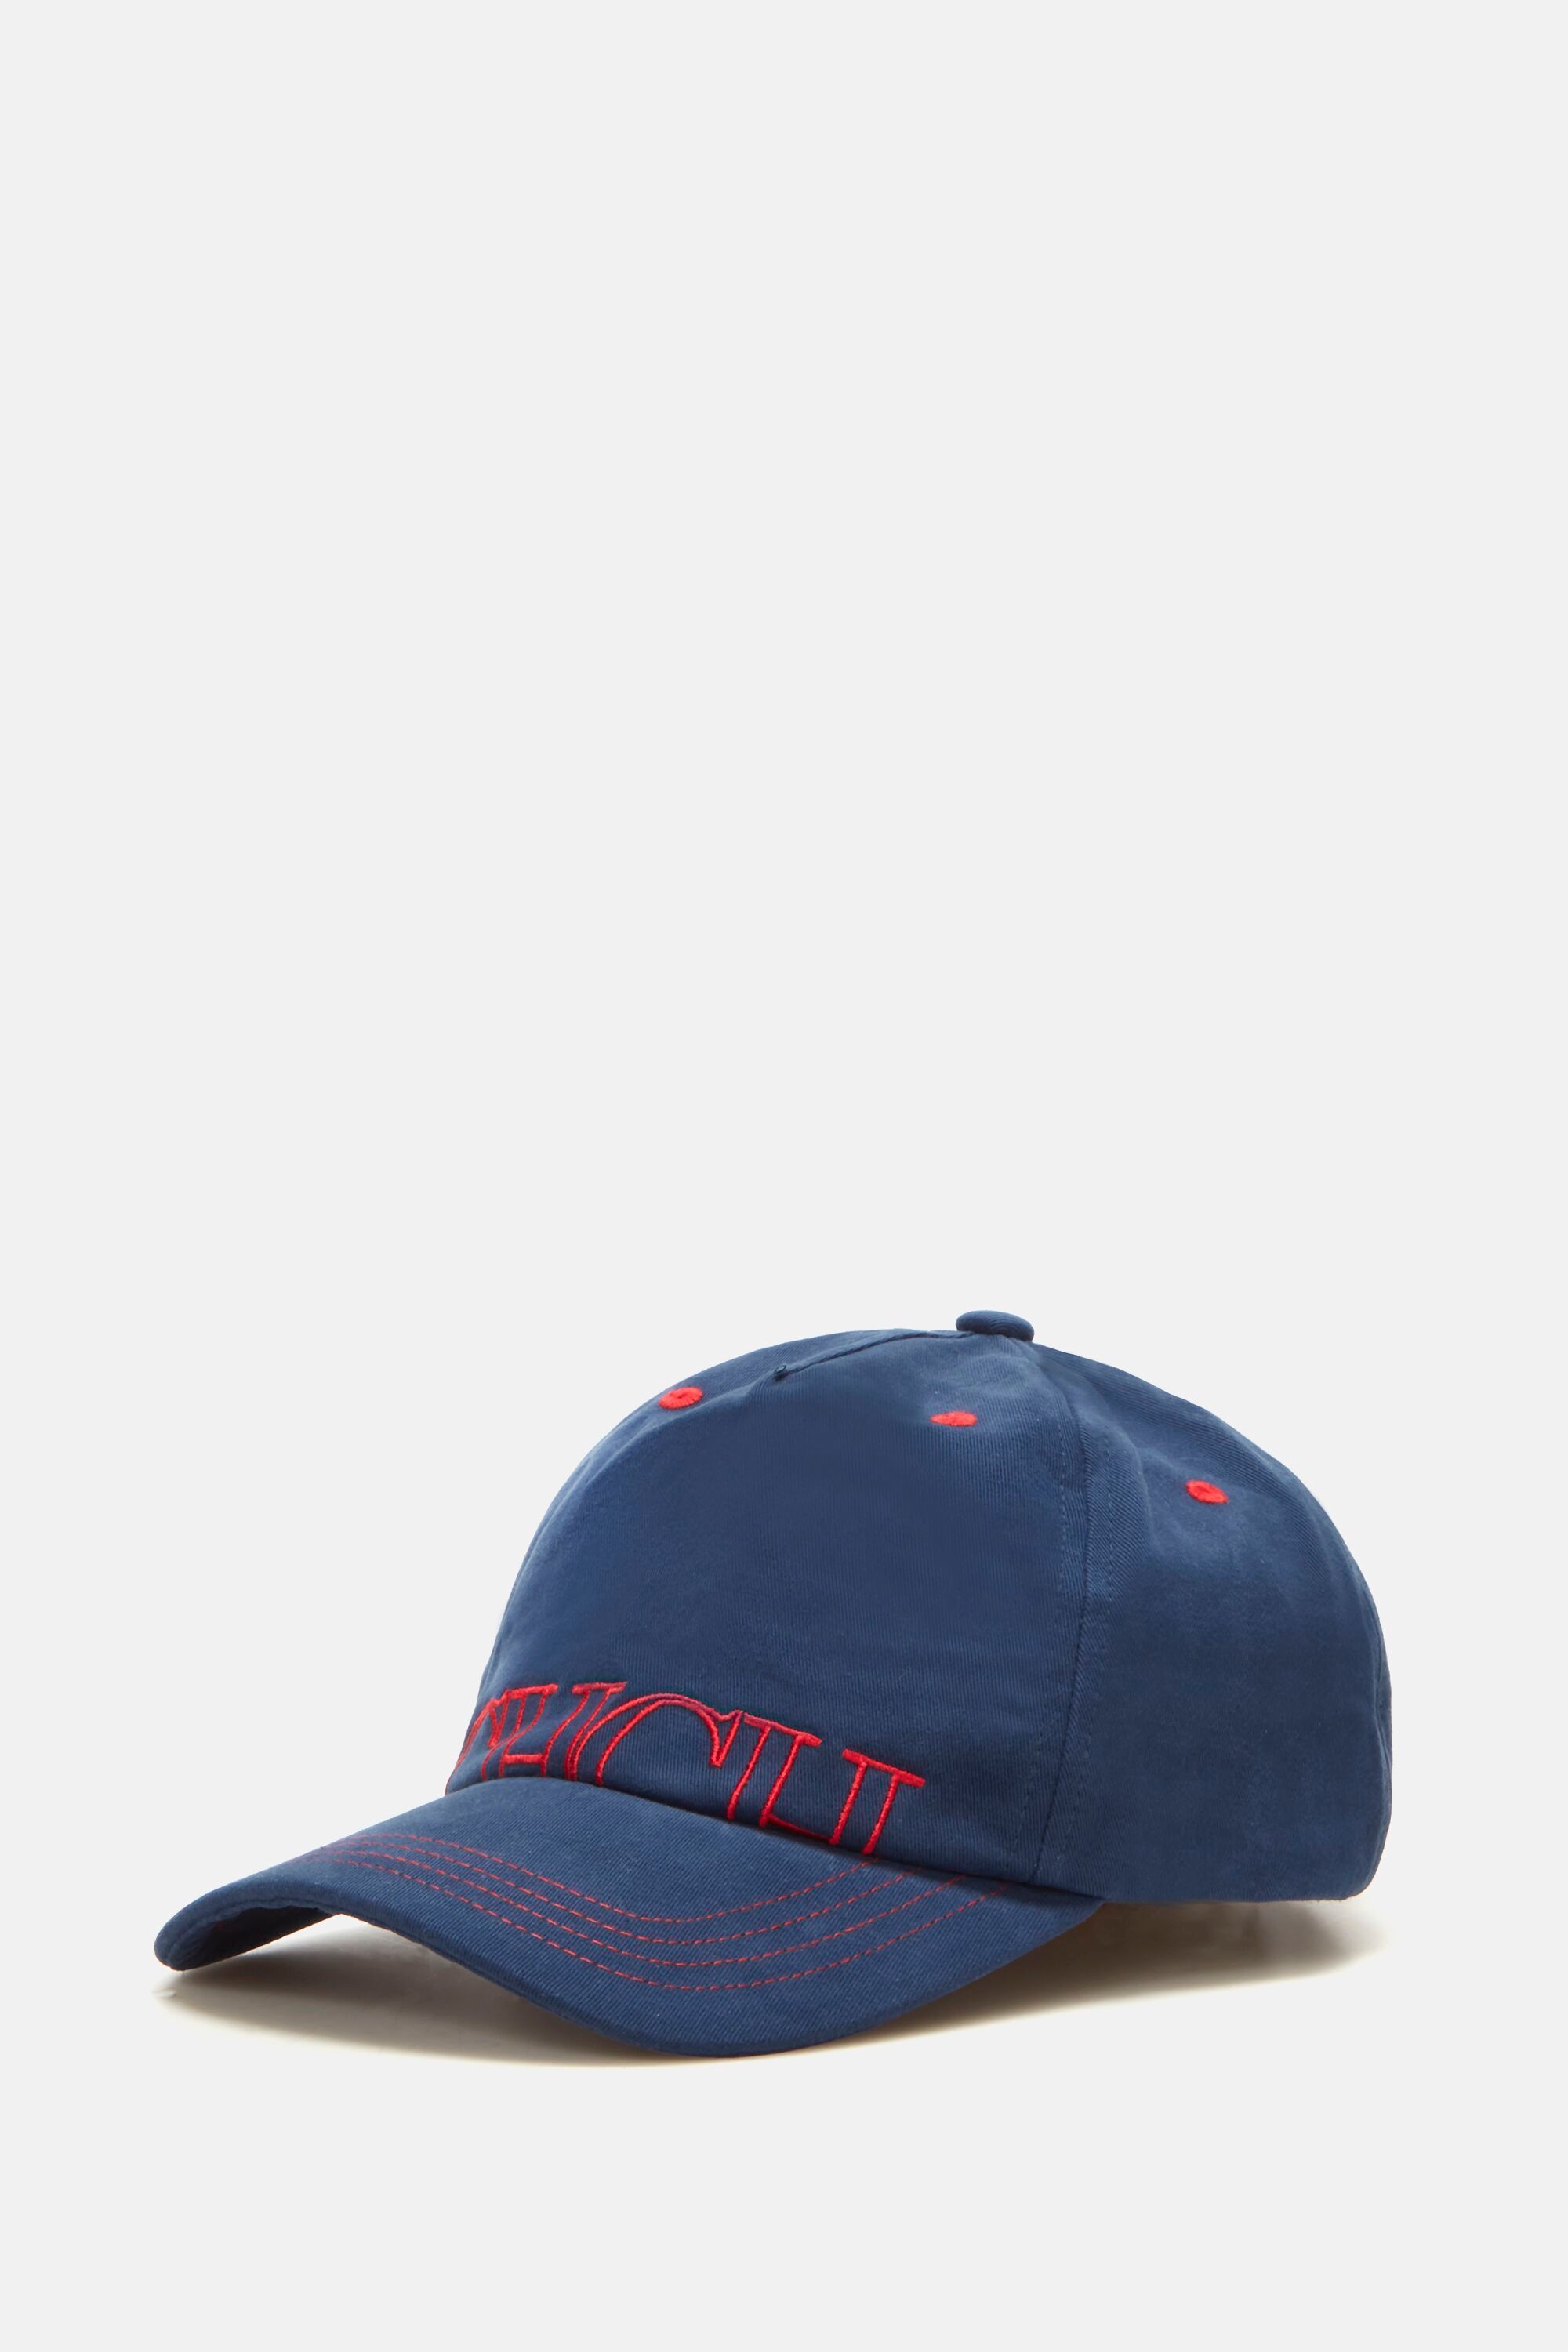 CH embroidered canvas baseball cap